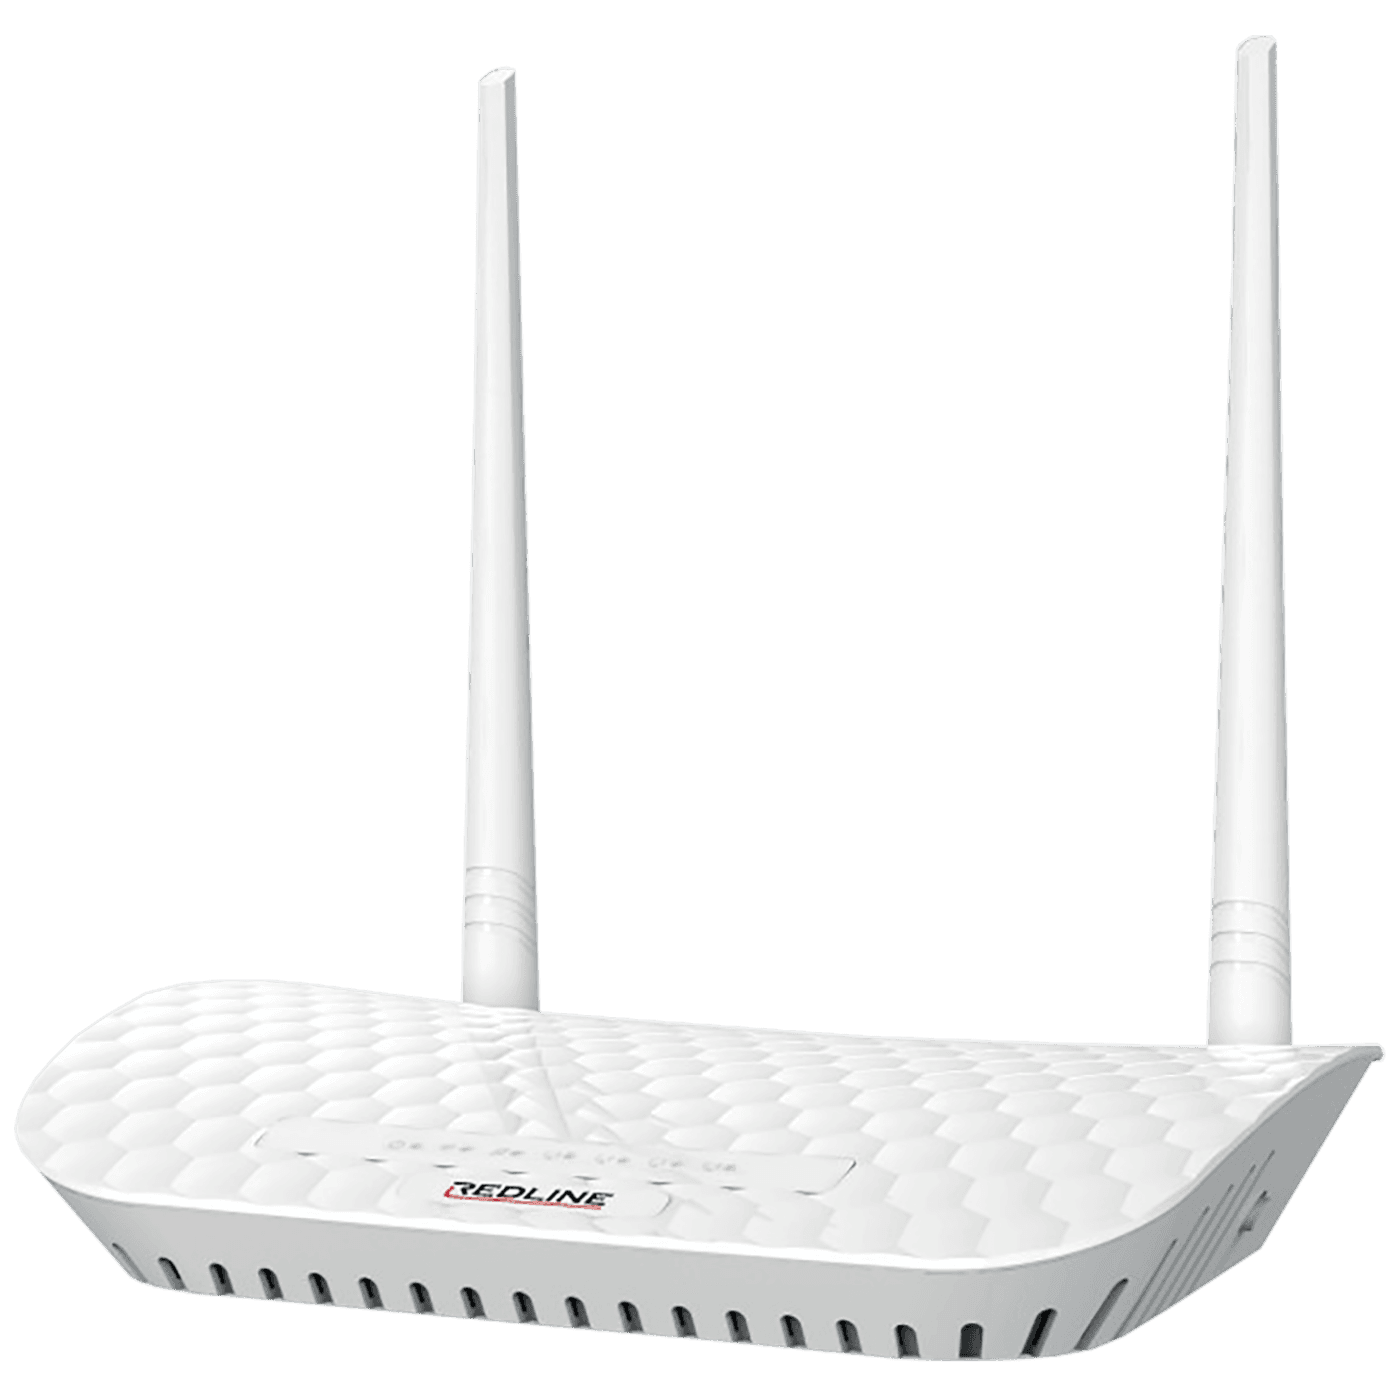 Selected image for REDLINE Wireless N Router 4 porta 300Mbps 2 x 5 dBi antena